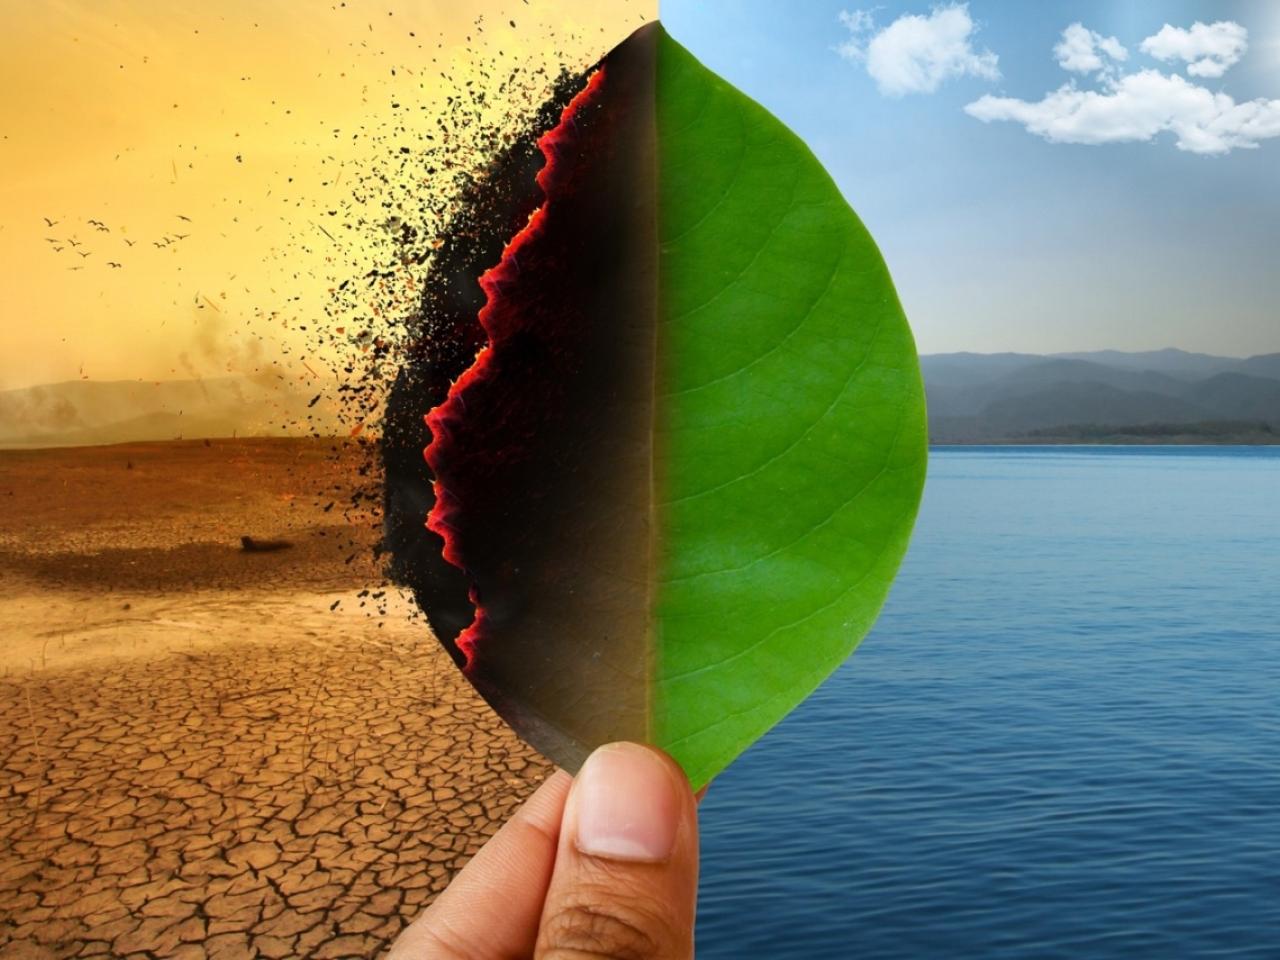 Hand holding leaf - on right side the leaf is green atop clear blue water and on left side leaf is black and burning atop parched dirt to depict climate change.